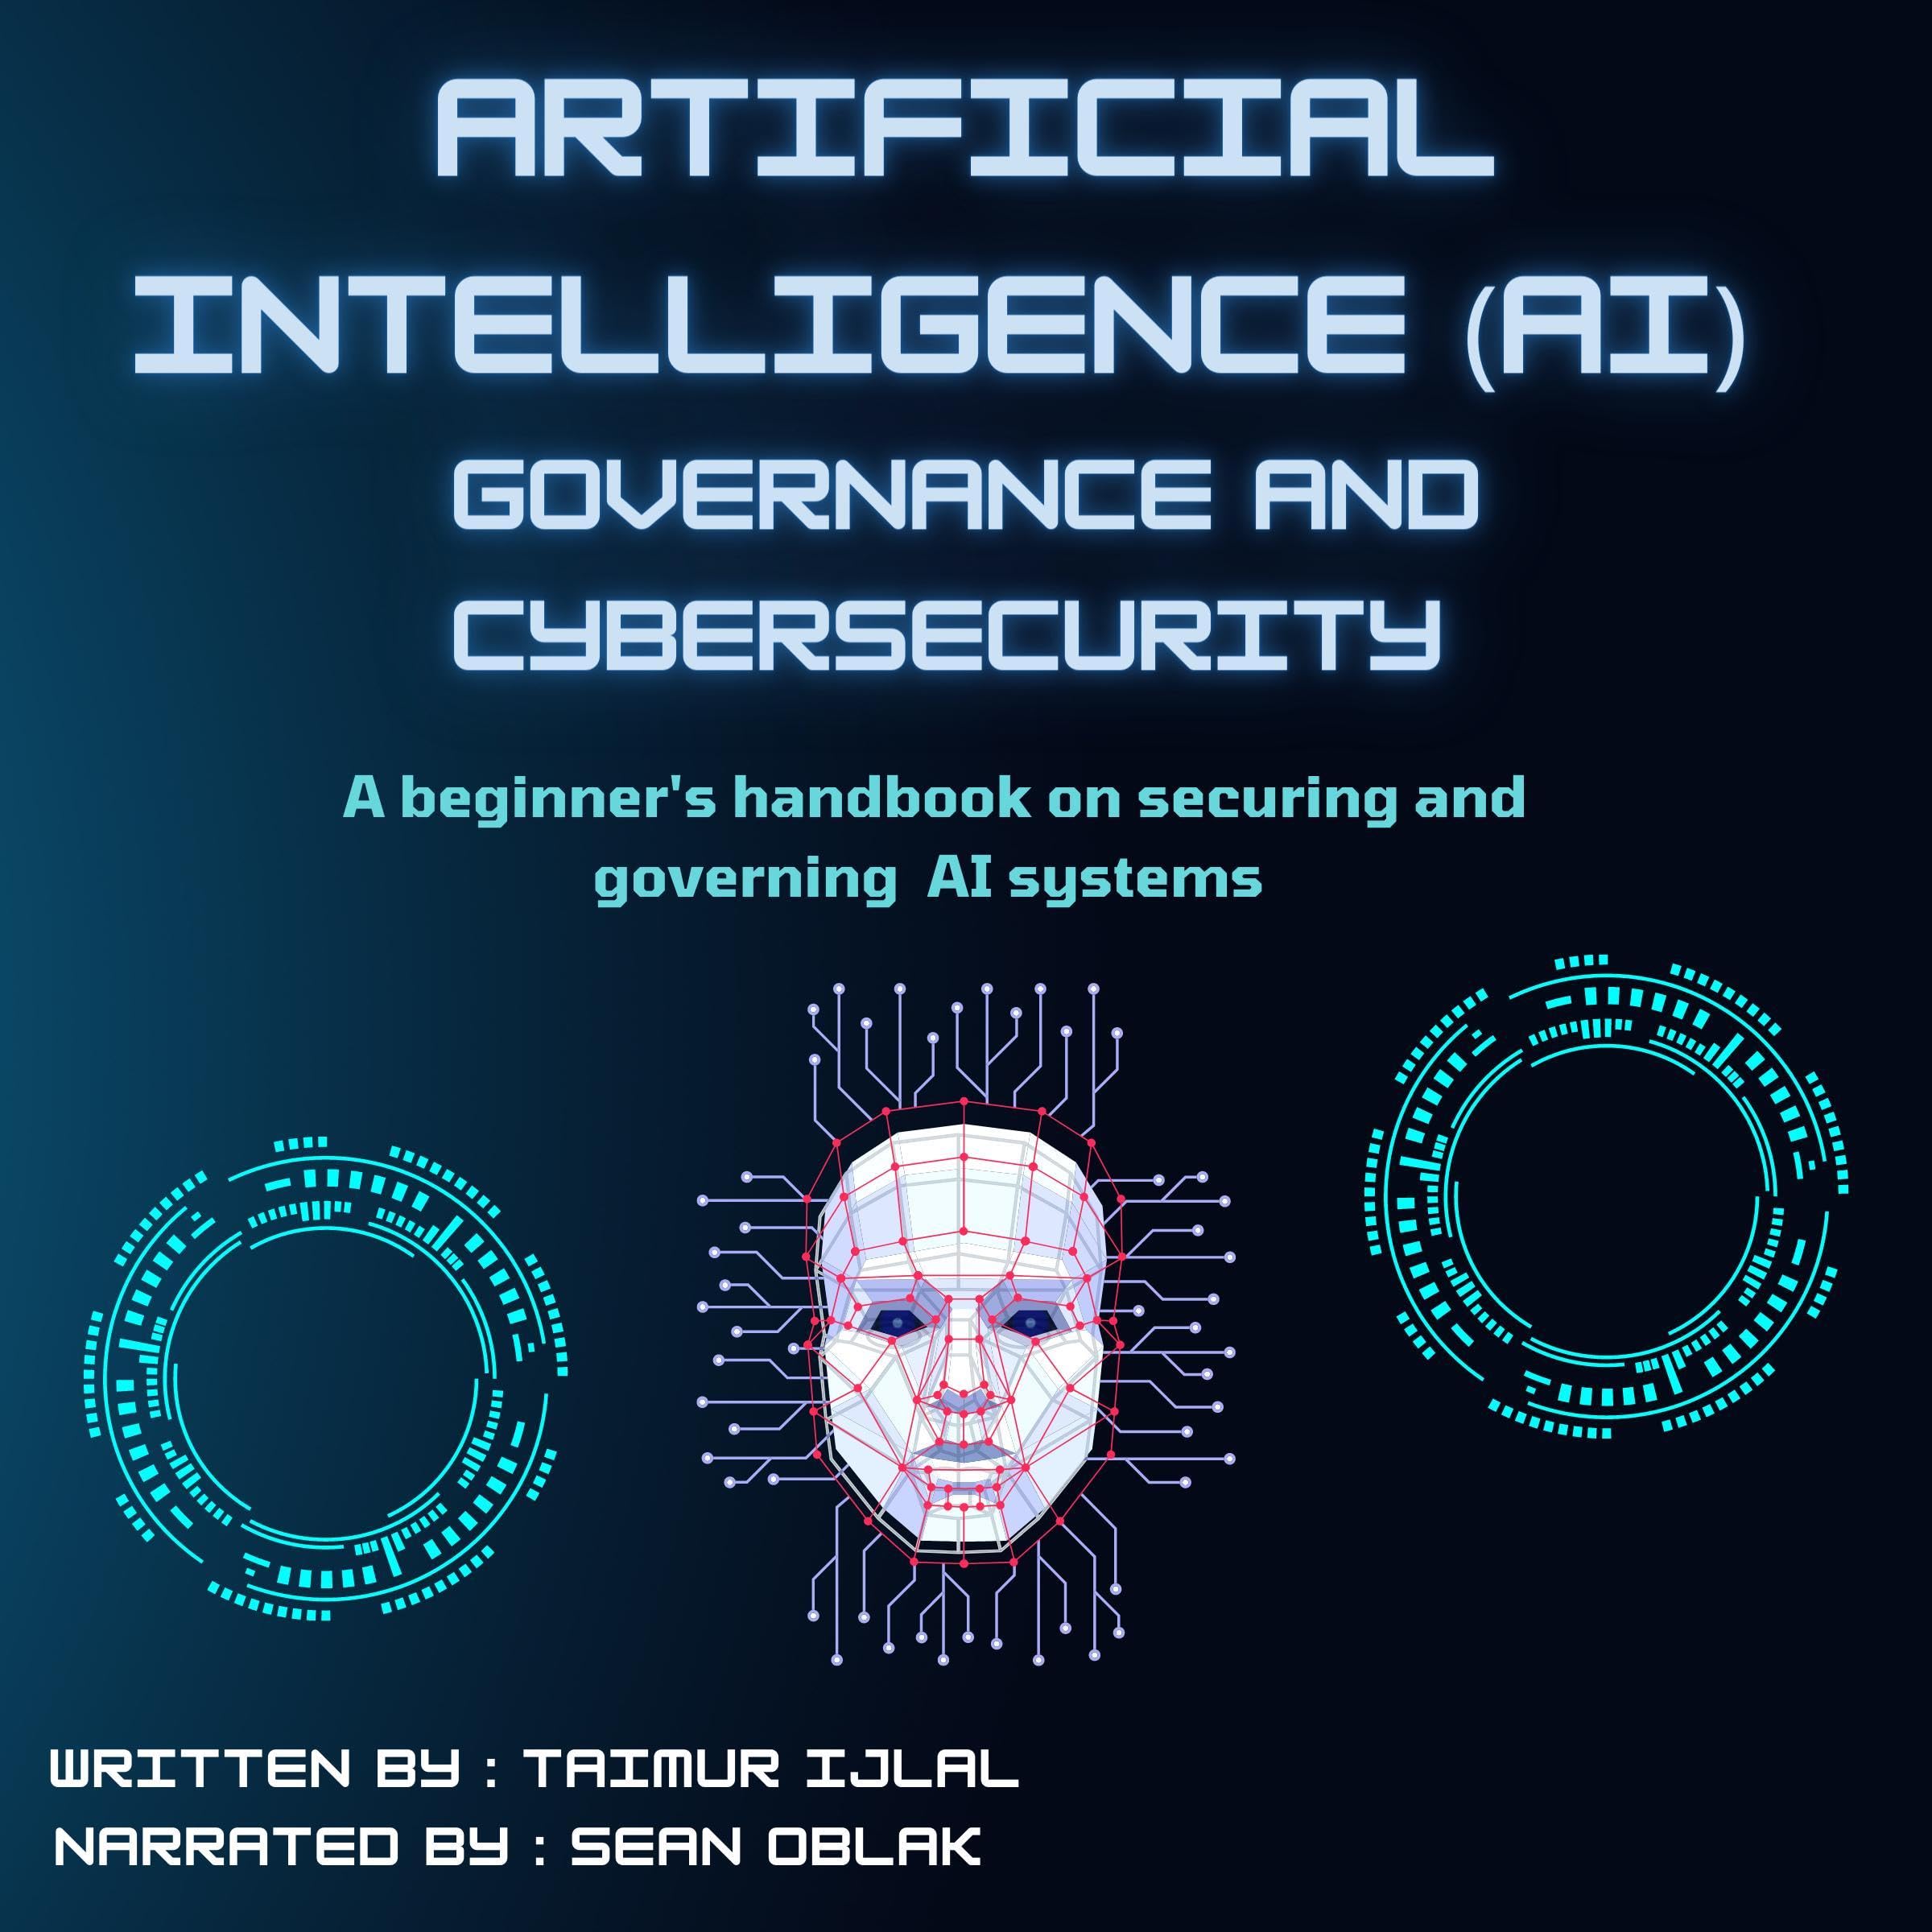 Artificial Intelligence (AI) Governance and Cyber-Security: A Beginner’s Handbook on Securing and Governing AI Systems